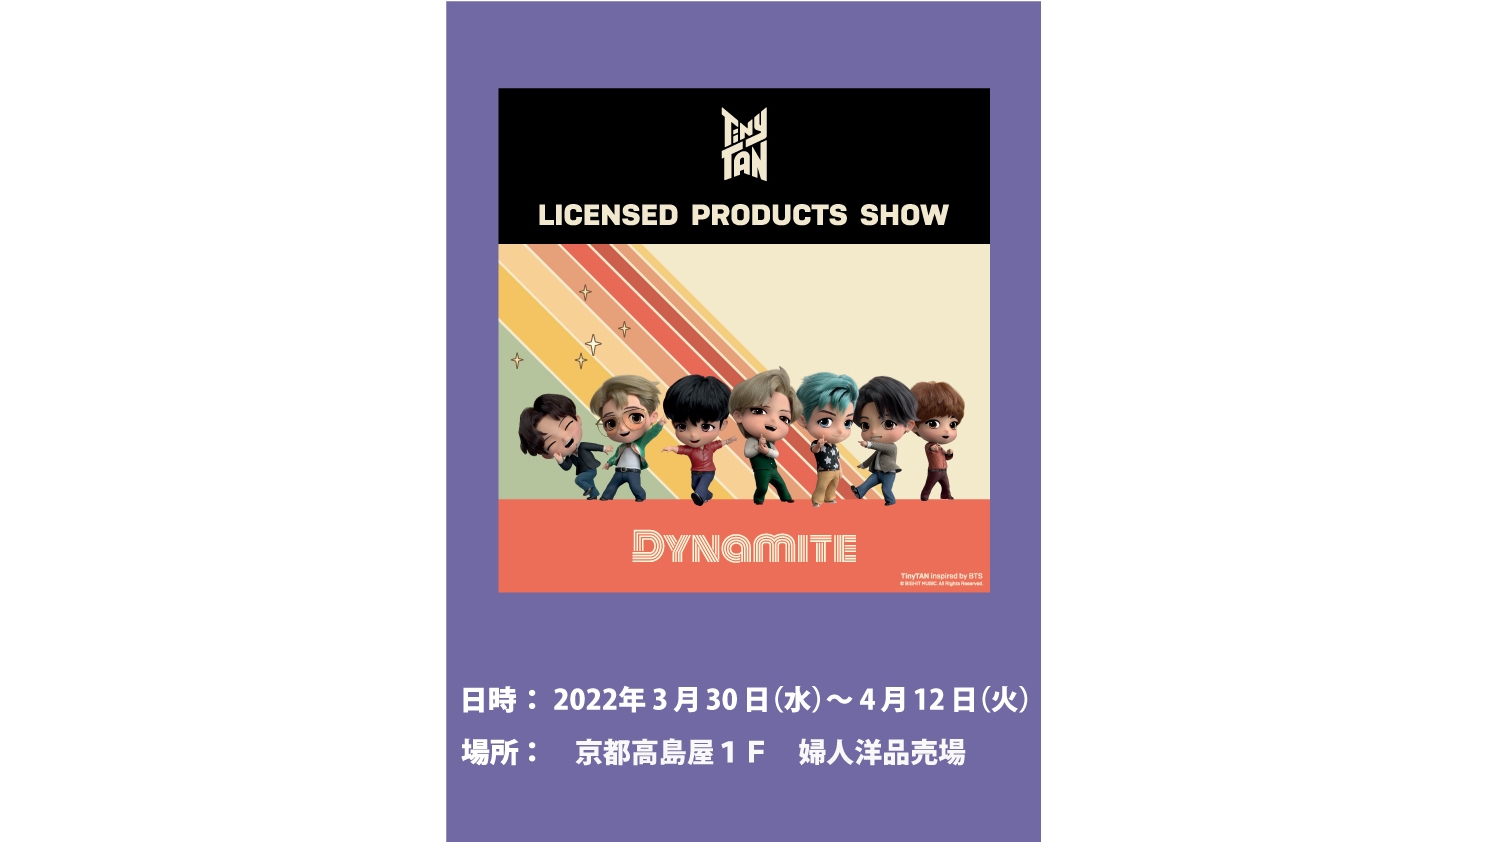 BTS LICENSED PRODUCTS SHOW1